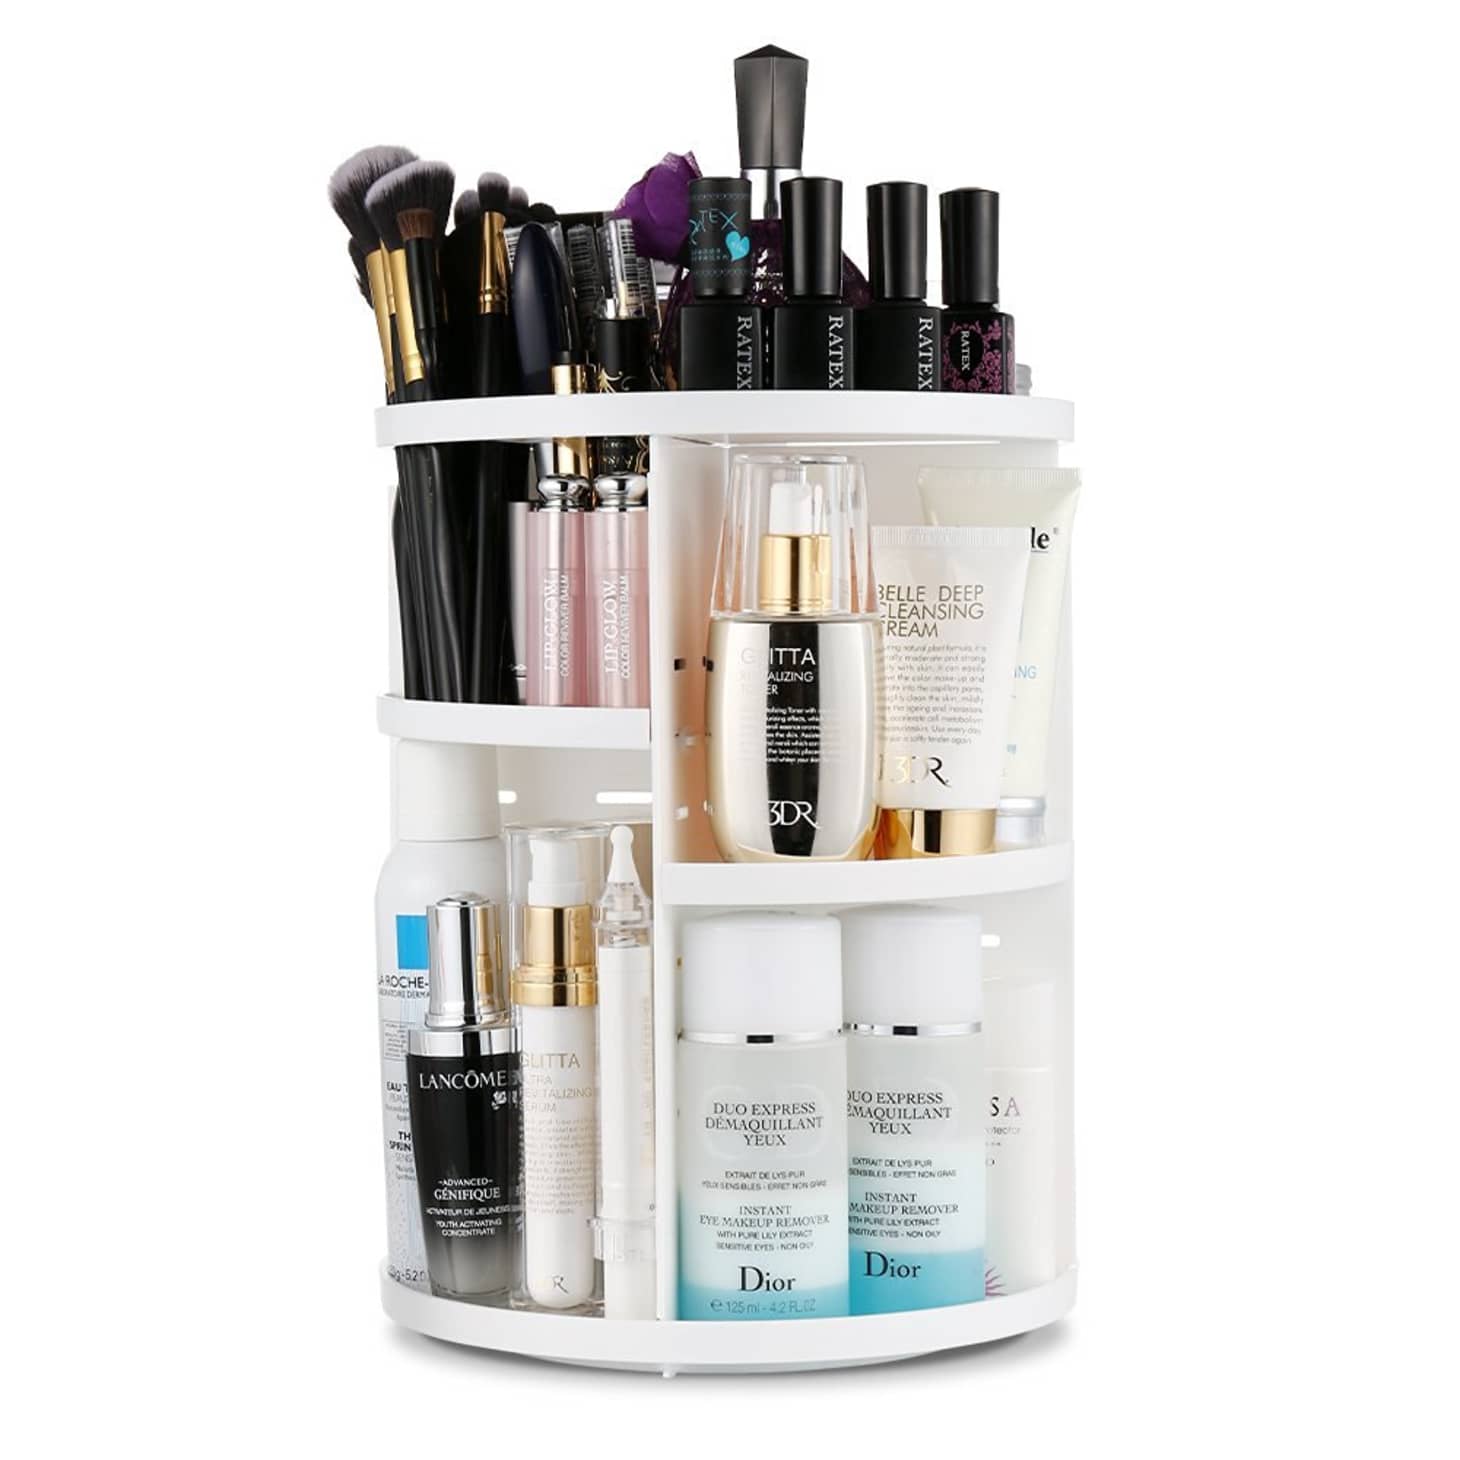 The Best Makeup Organizers Apartment Therapy